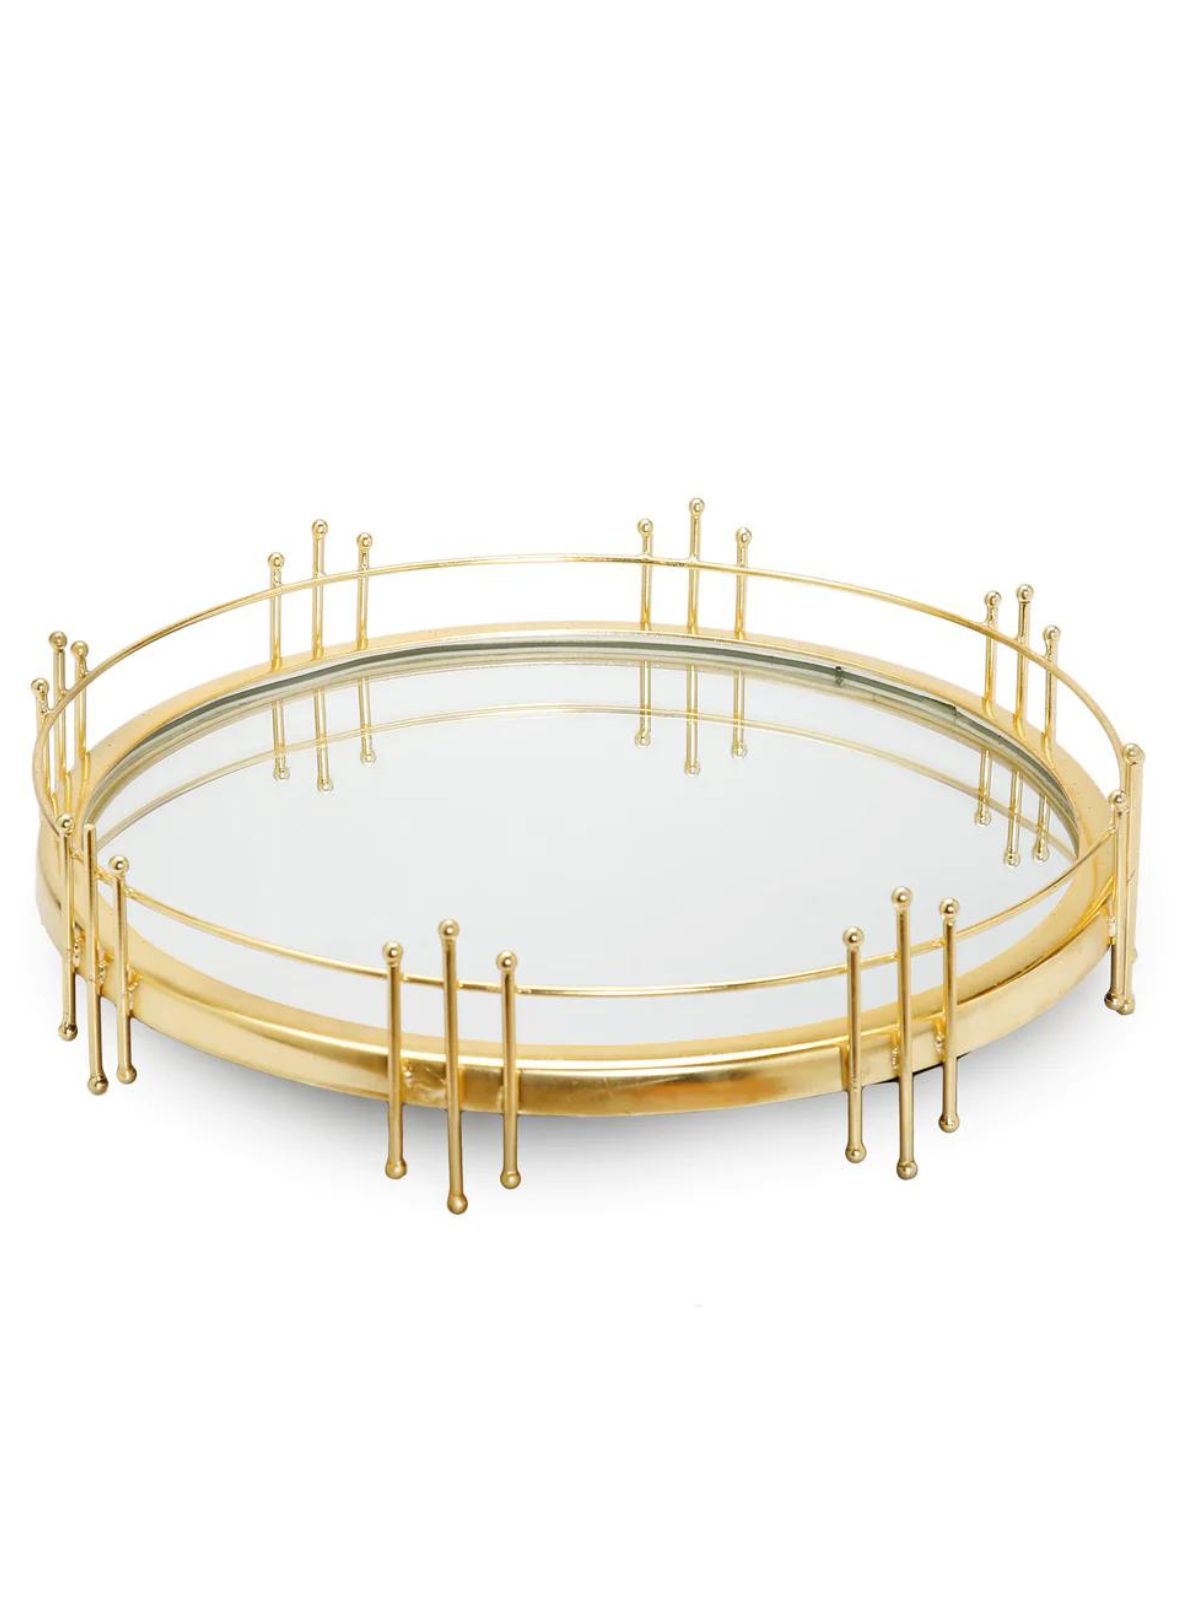 14D Round Mirror Tray with Gold Symmetrical Design Metal Border. Sold by KYA Home Decor.